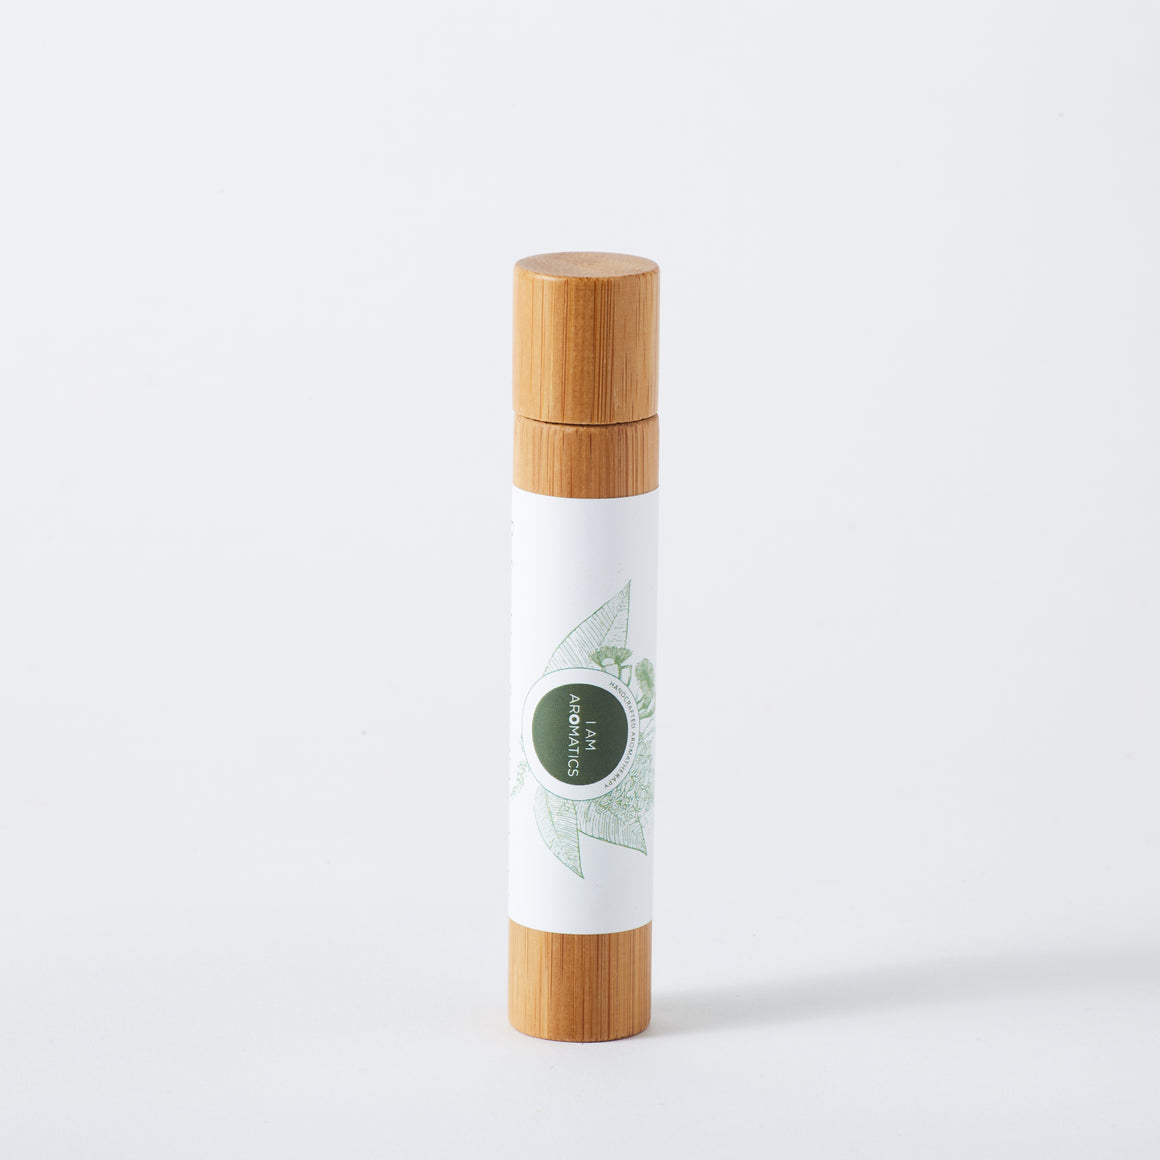 I am Calm mother and child range, 10ml bamboo roller blend with white label and botanical logo